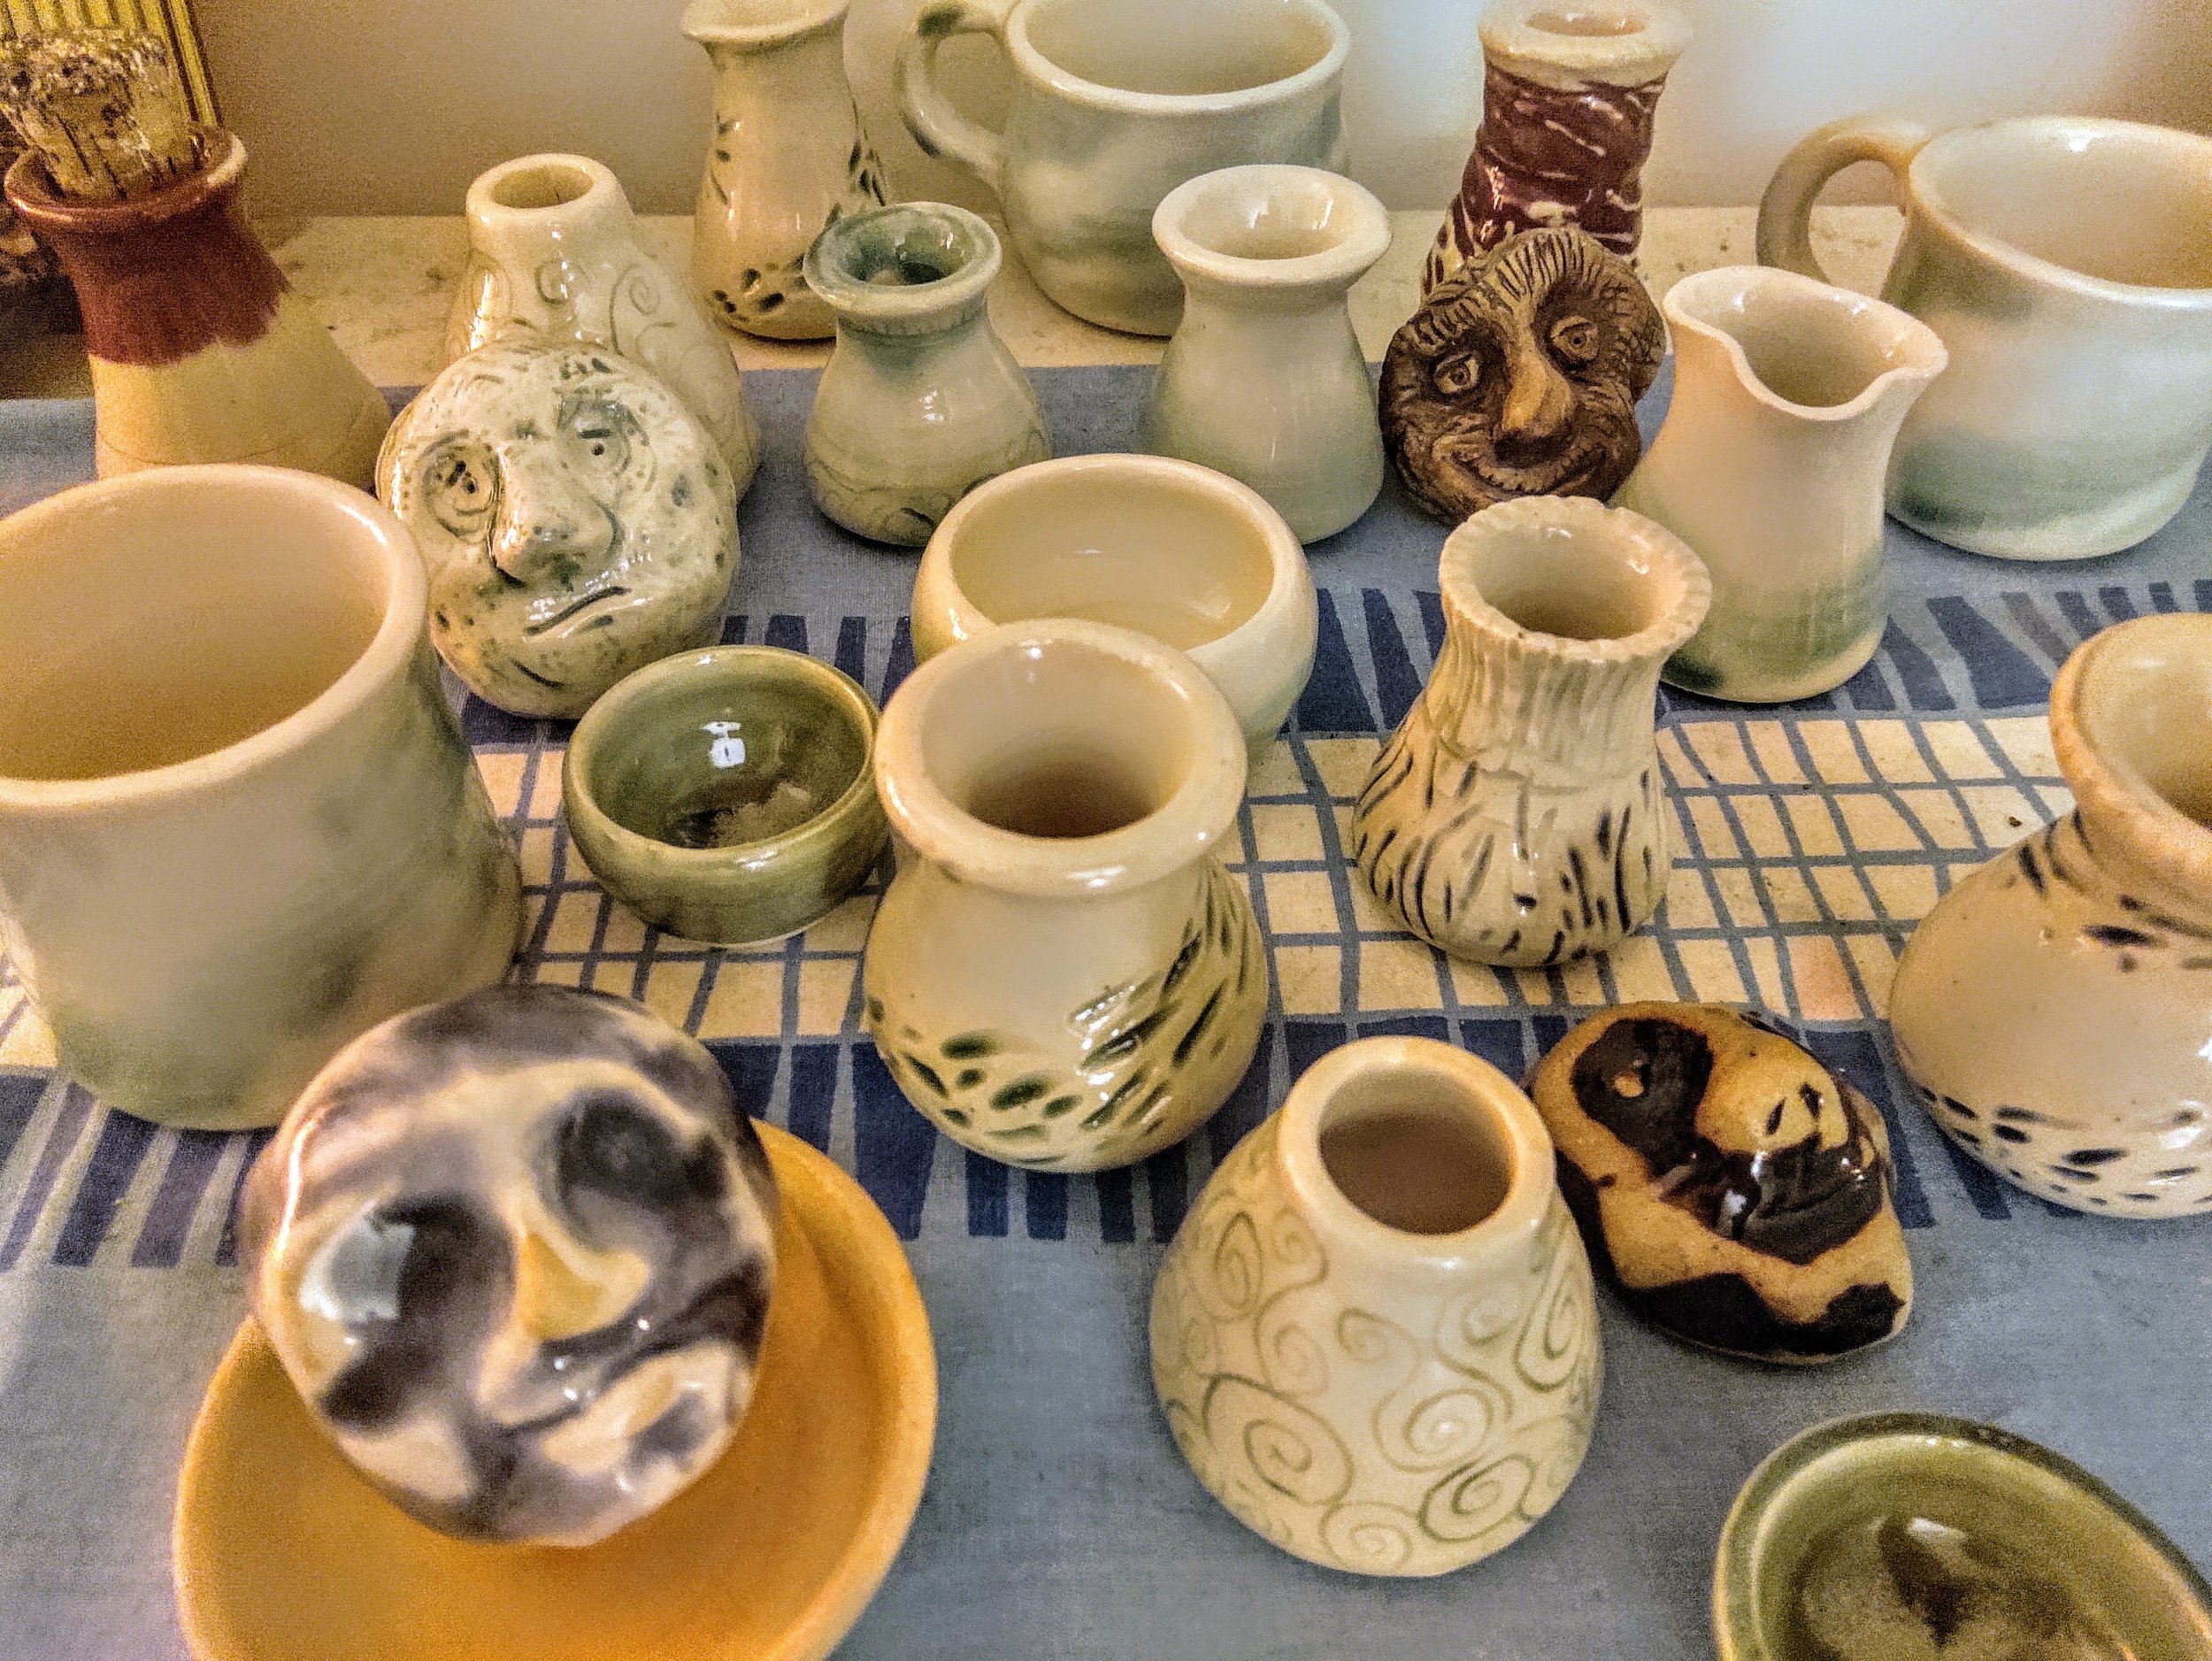 FROM THE POTTERY